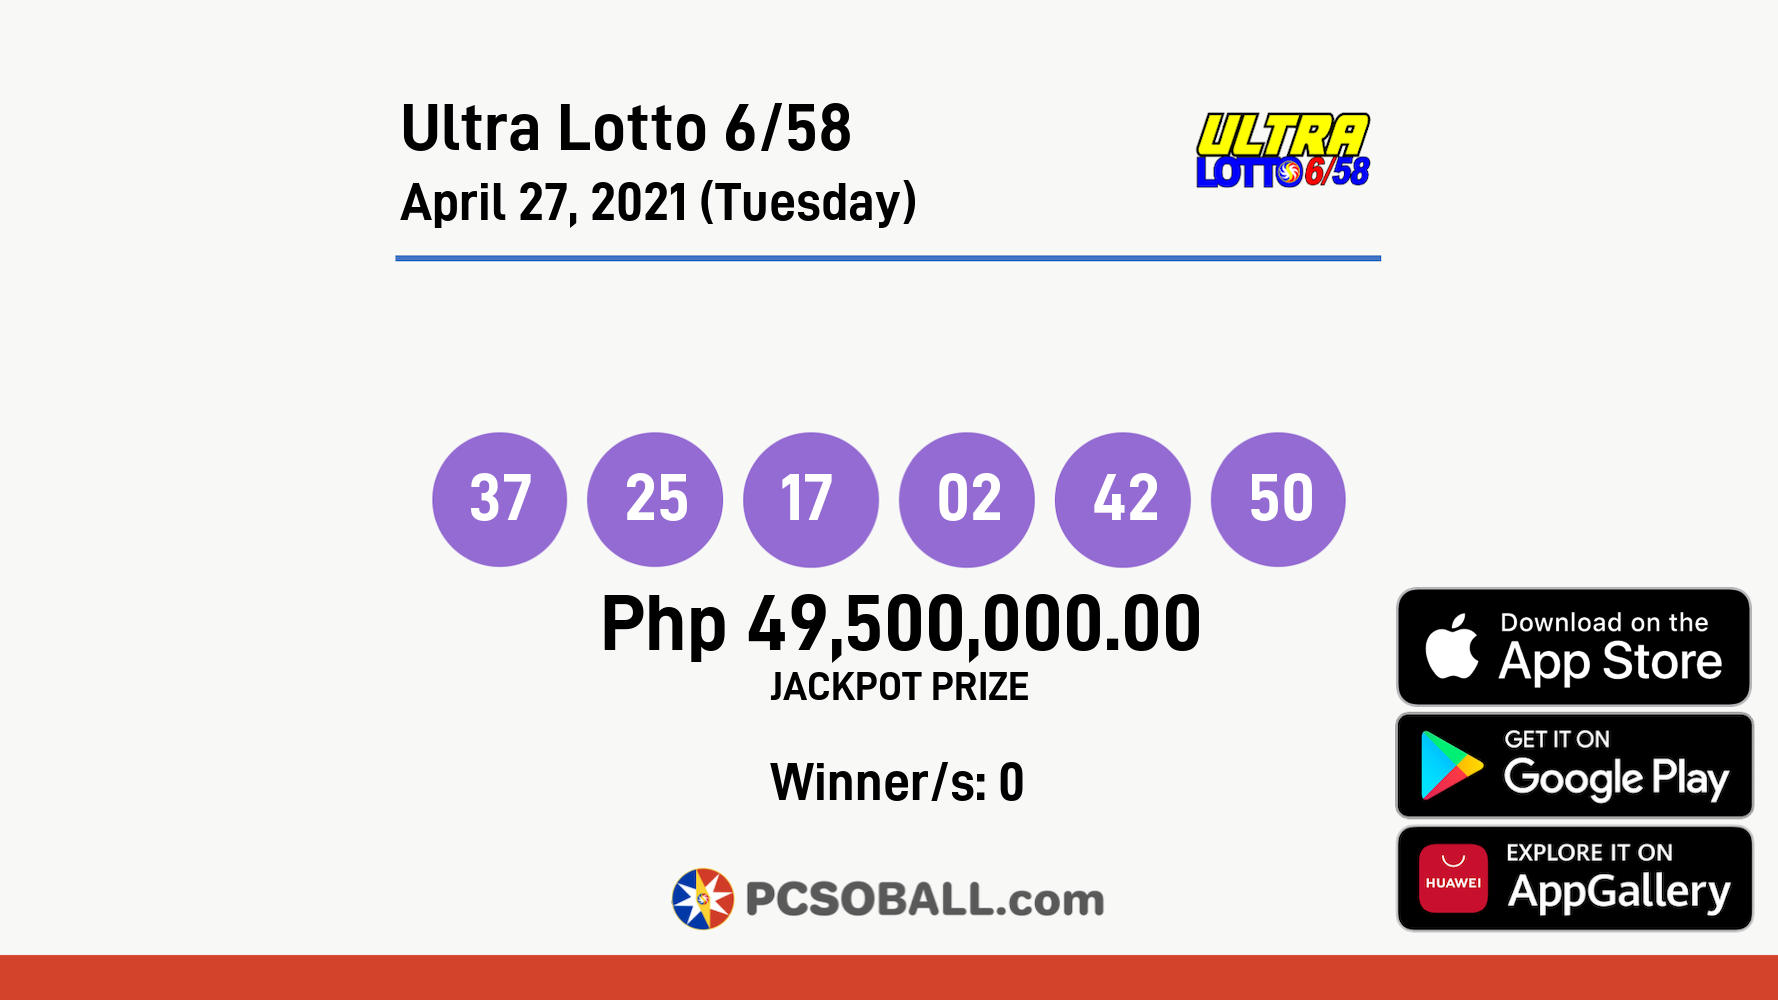 Ultra Lotto 6/58 April 27, 2021 (Tuesday) Result